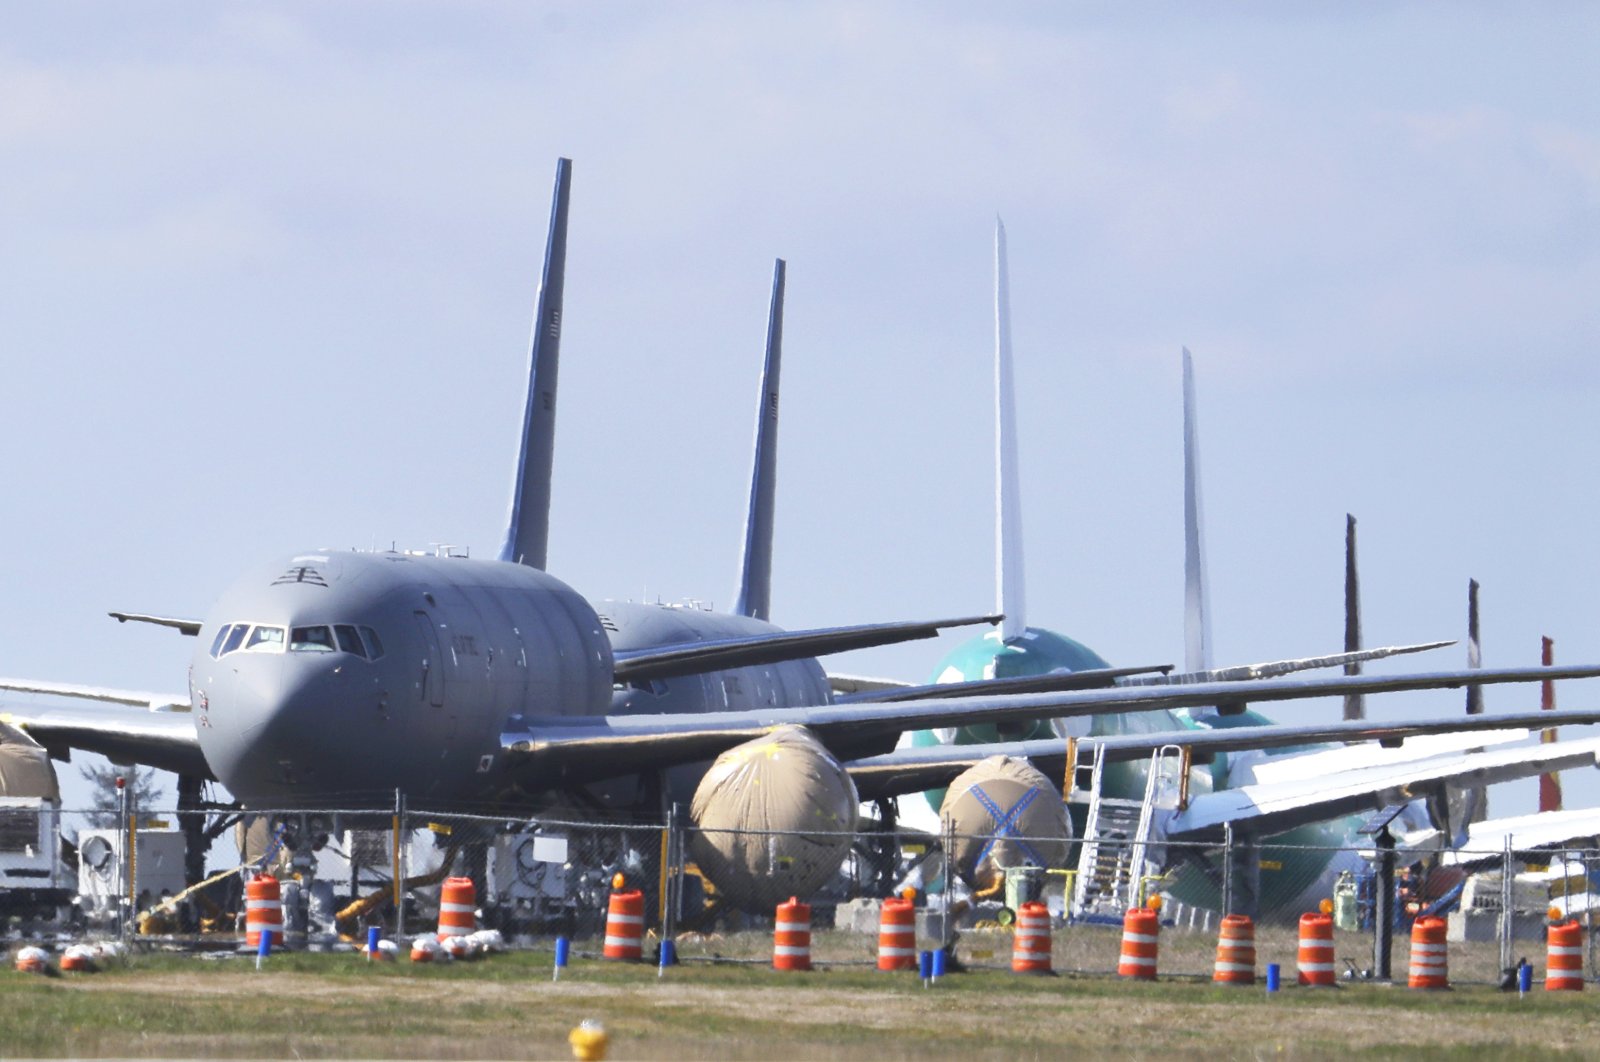 In this April 7, 2020, file photo, U.S. Air Force KC-46 tankers being built by Boeing sit parked at the Paine Field airport in Everett, Wash. (AP Photo)